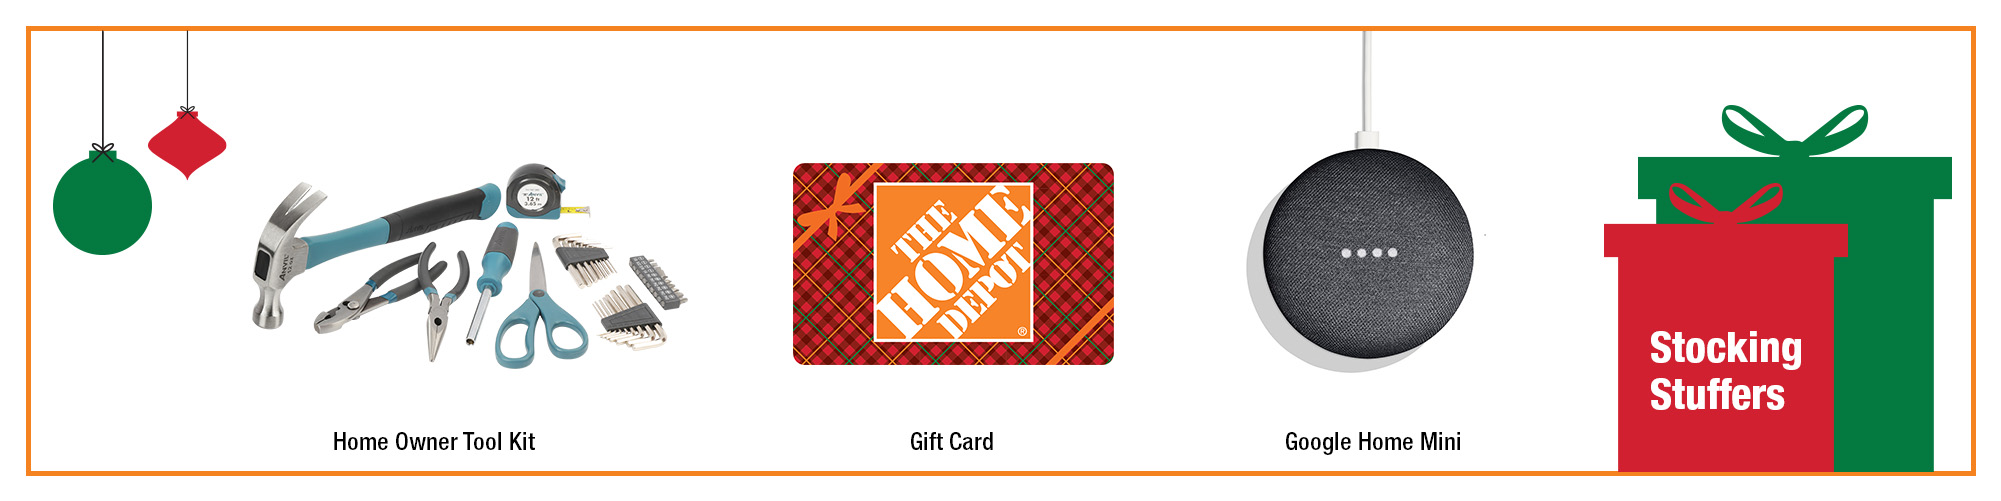 Stocking stuffers from The Home Depot